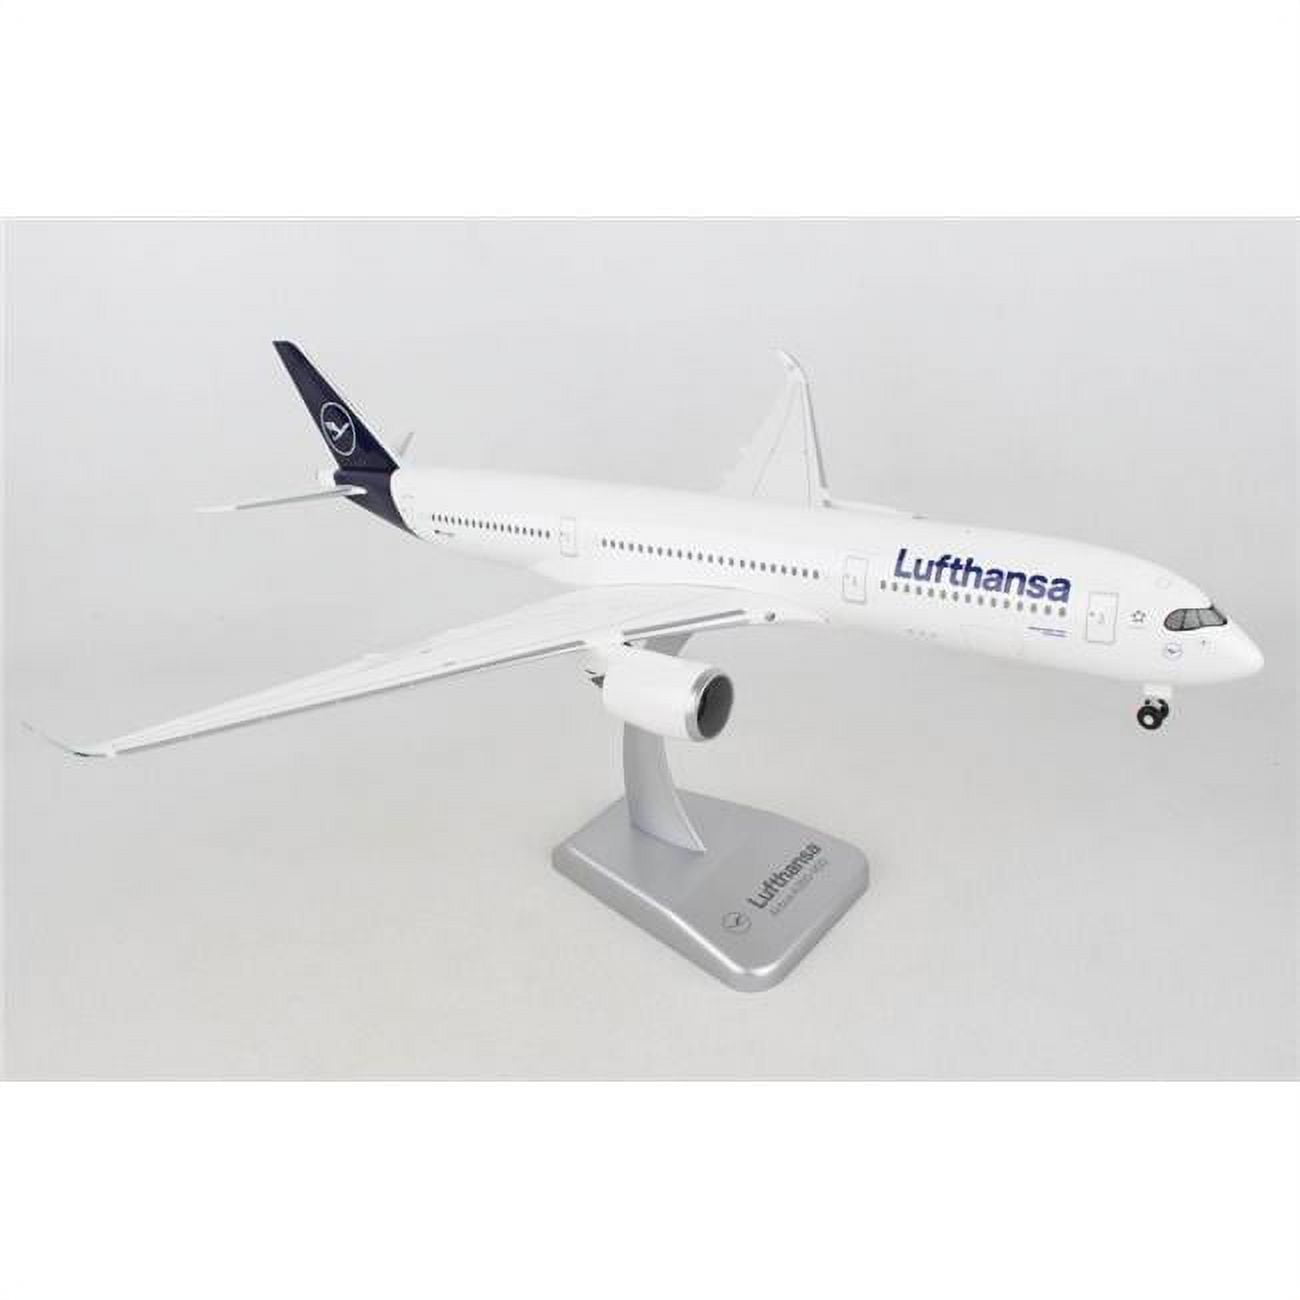 Hogan Wings Hgdlh001 1 By 200 Scale Lufthansa A350-900 New Livery Model Airliner With Gear, Registration No.d-aixi